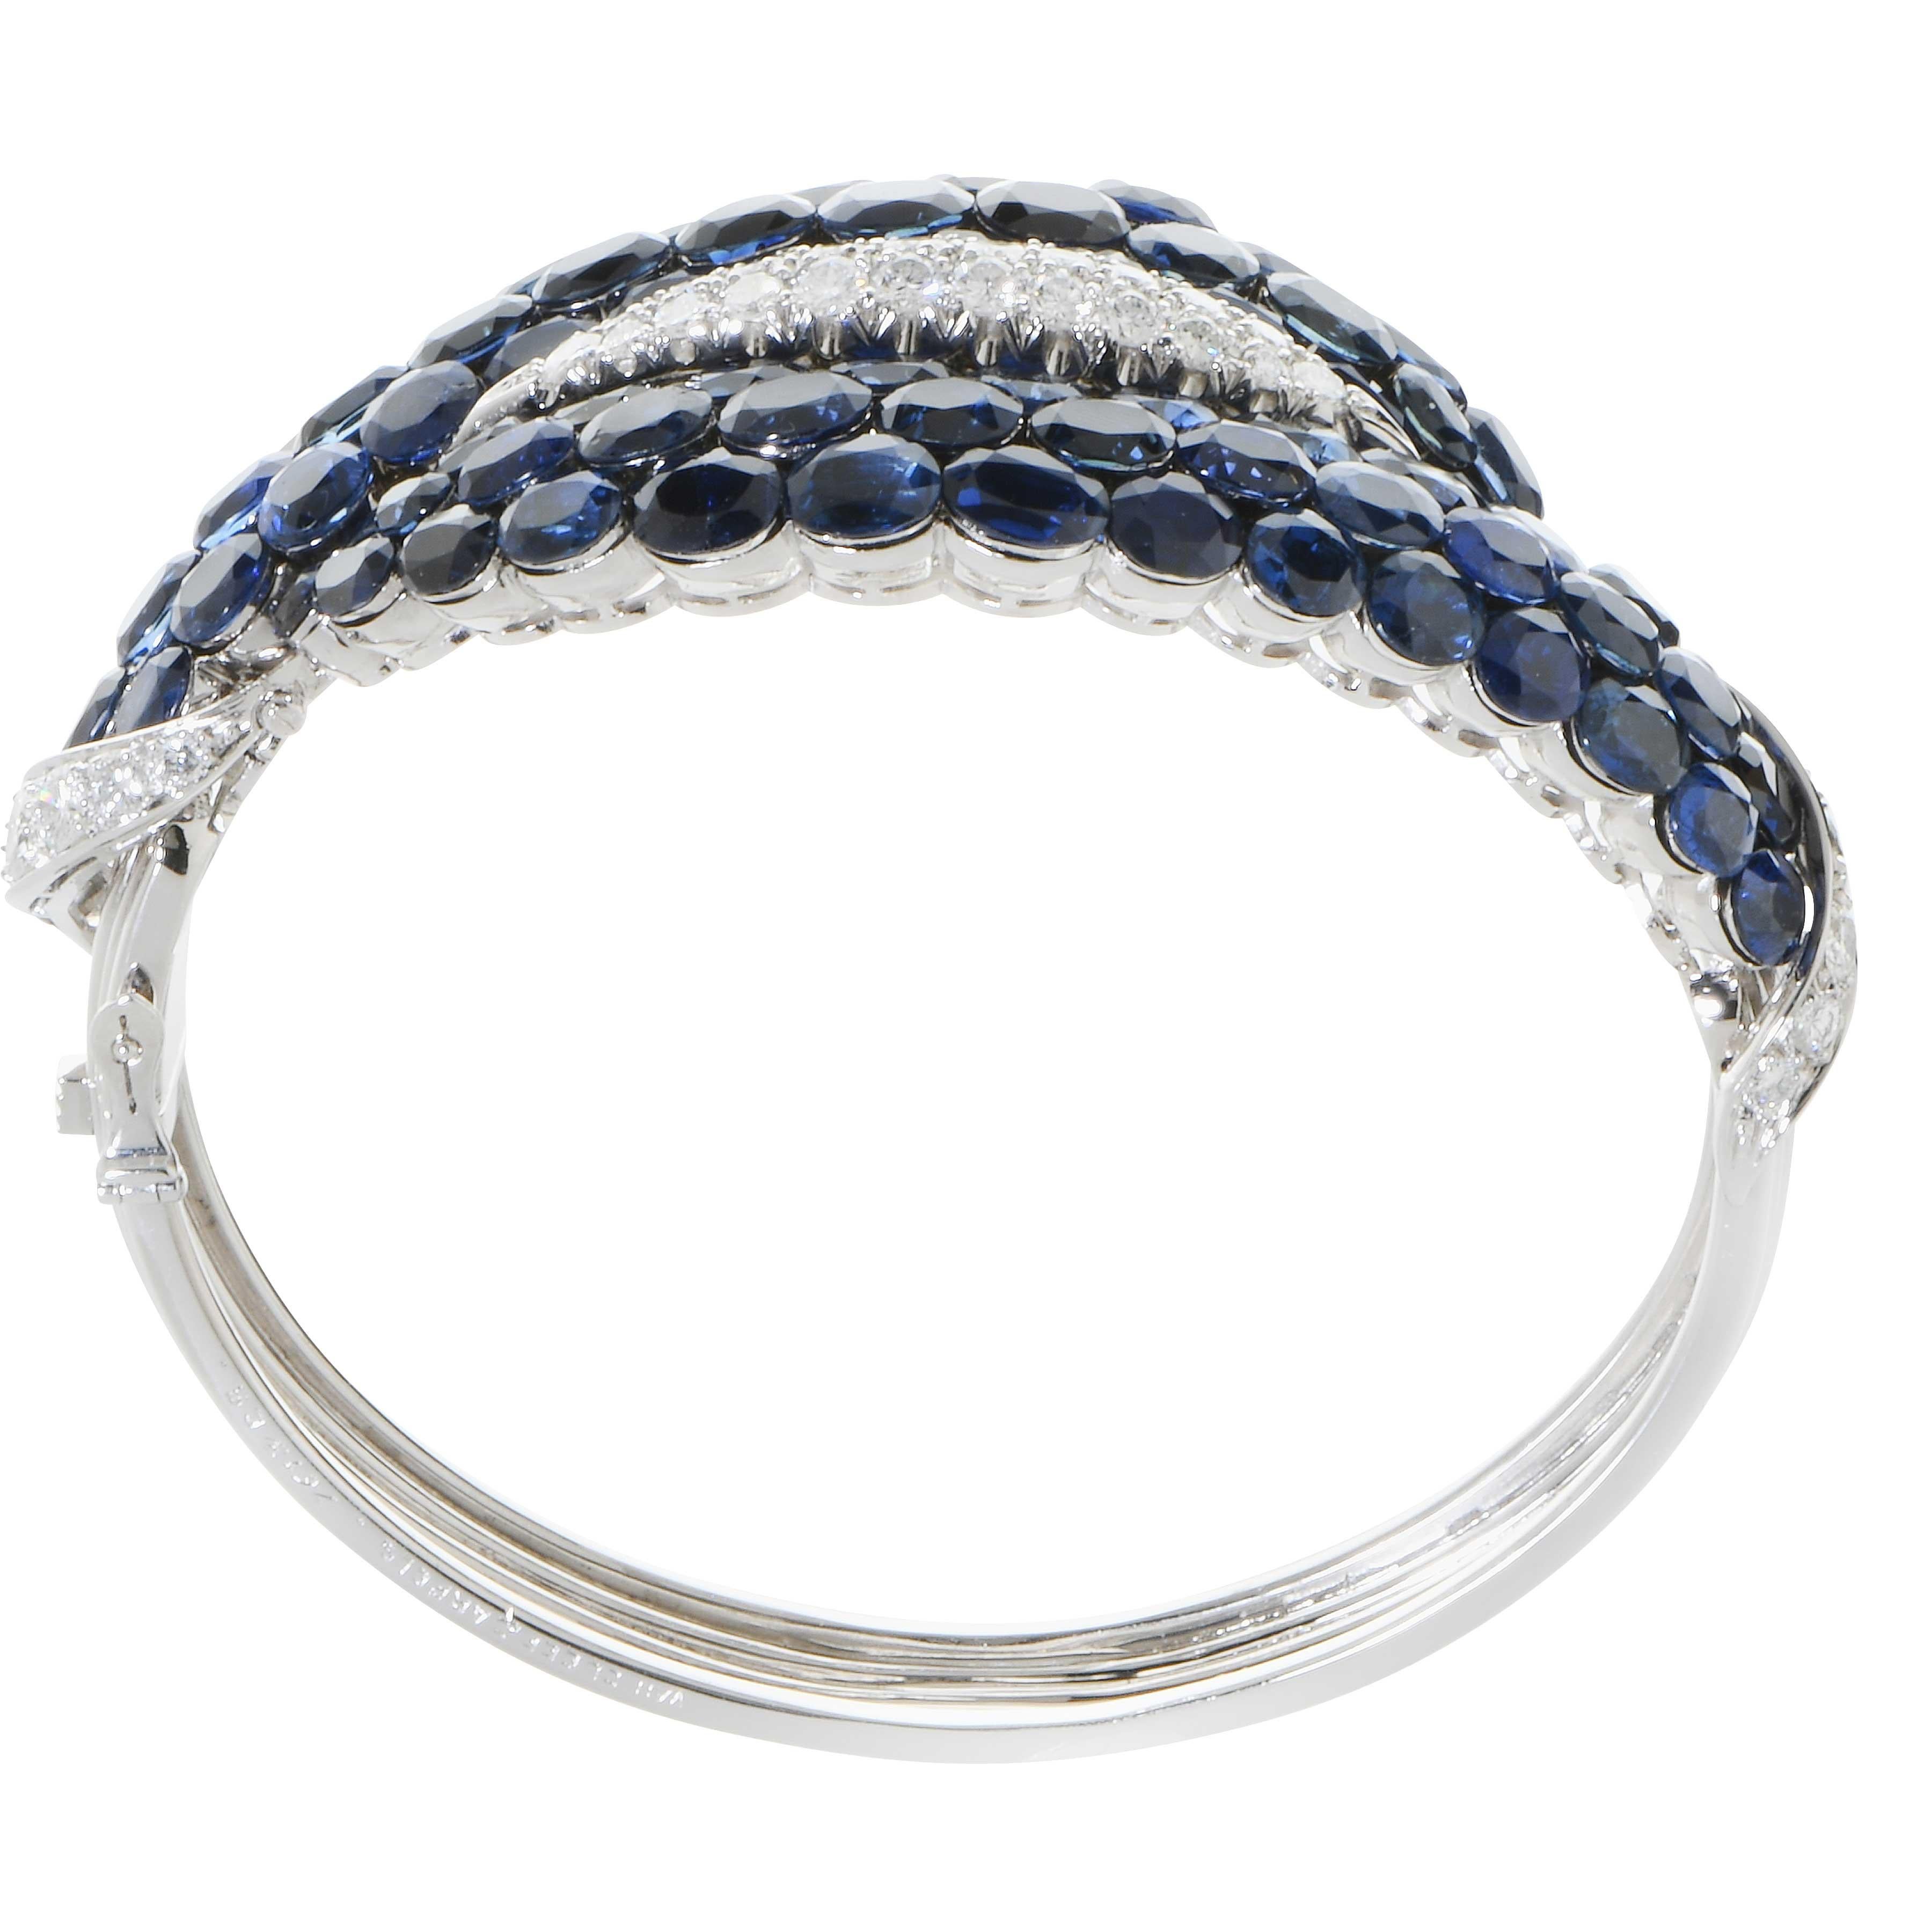 Modern Important Van Cleef & Arpels Sapphire and Diamond Bangle For Sale